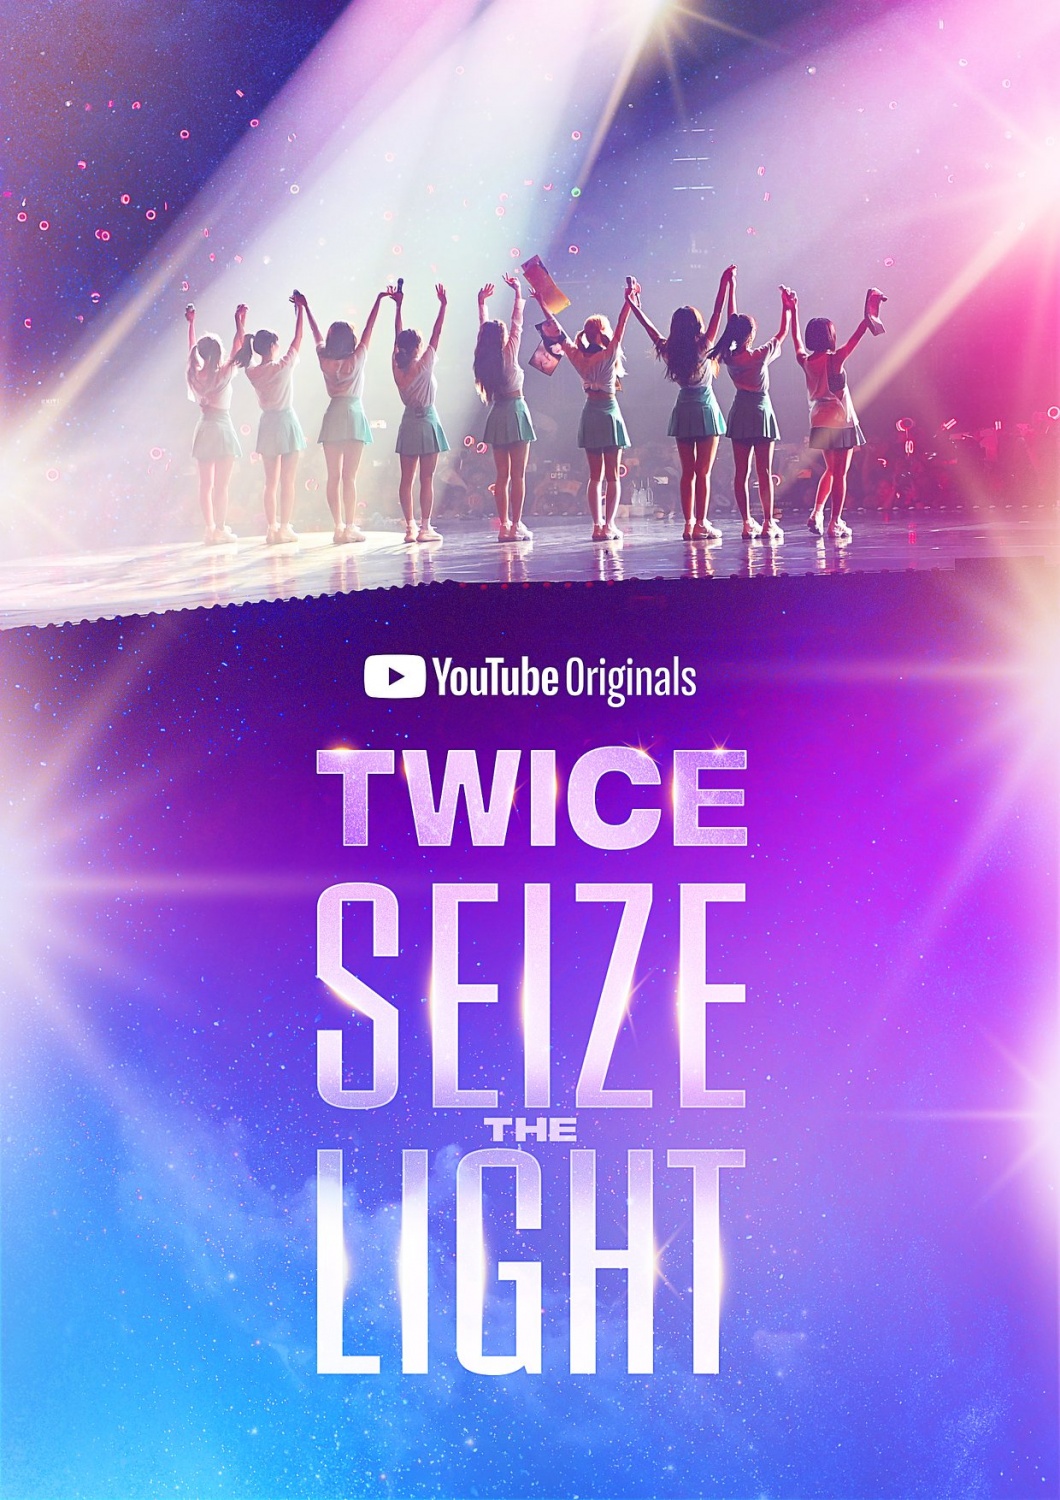 TWICE 'Feel Special' MV topped 200 million views, 12 consecutive hits